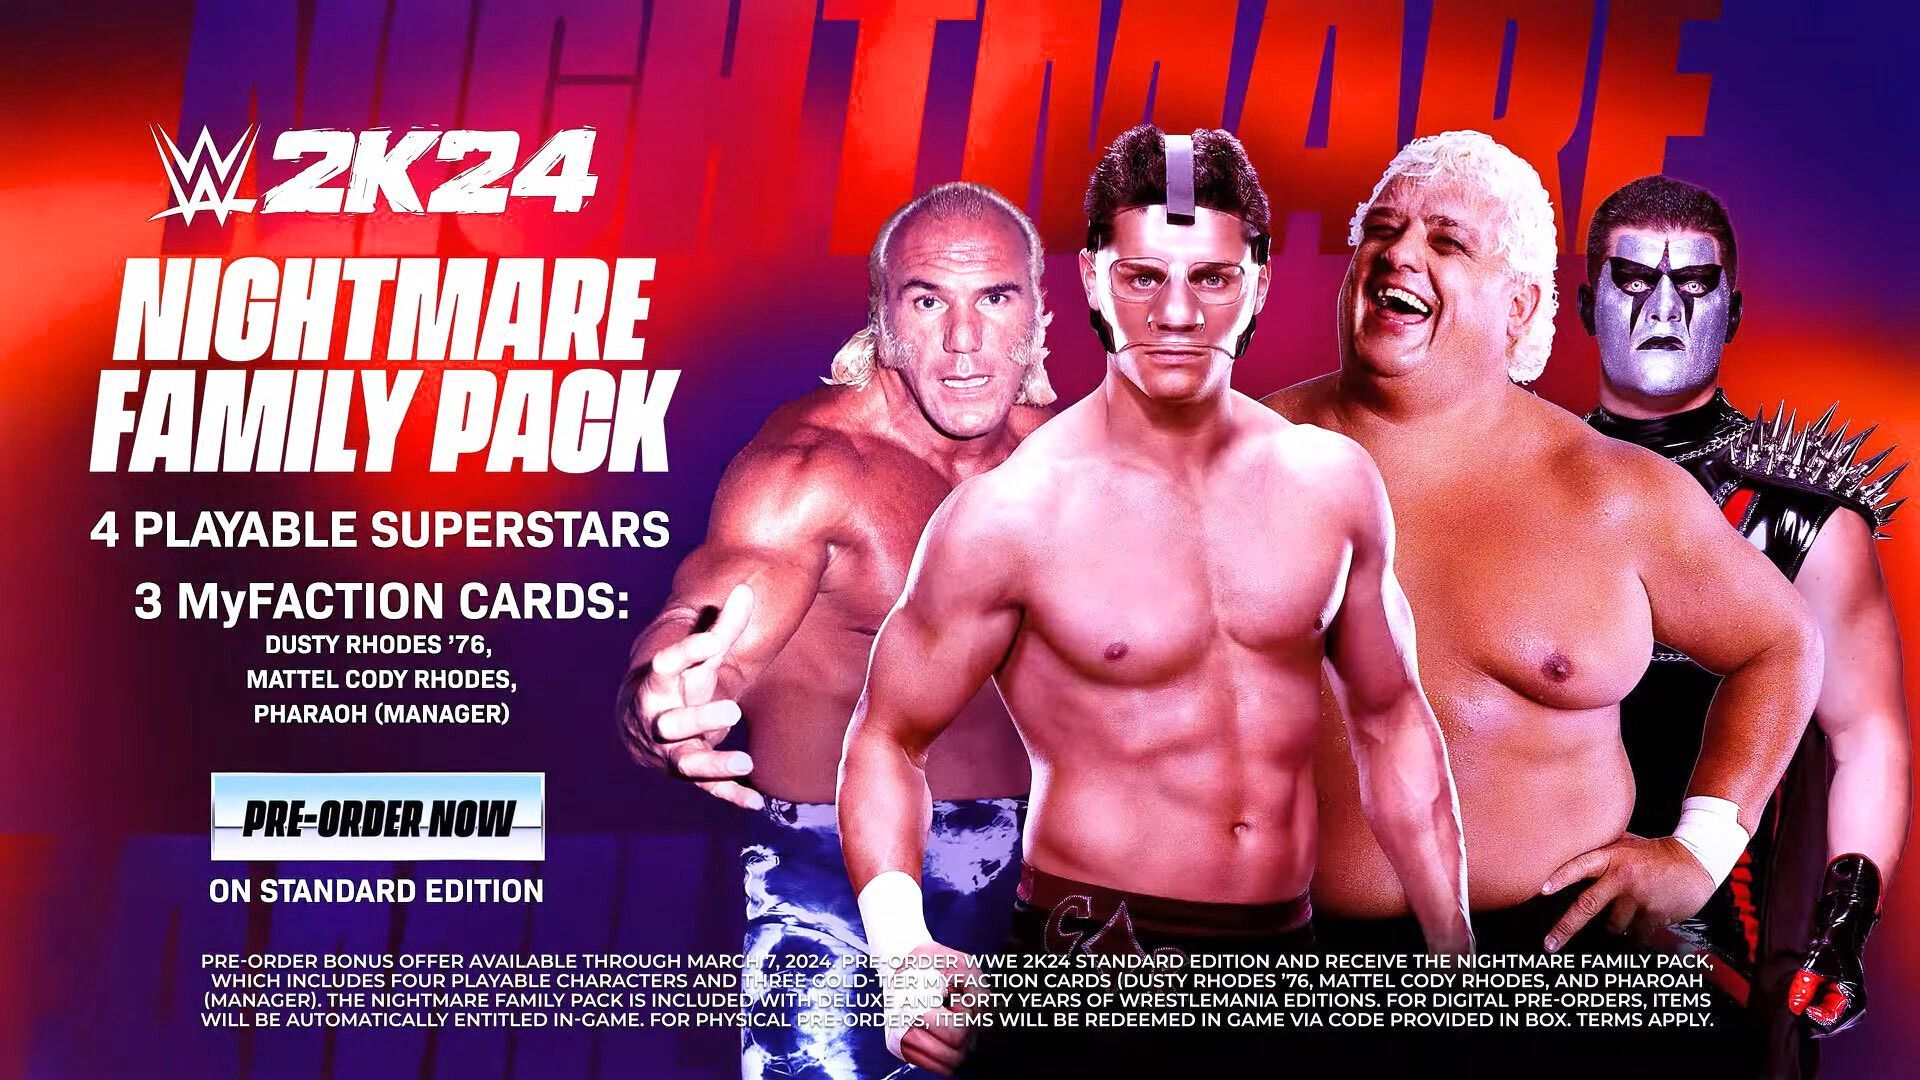 The contents of the Nightmare Family Pack in WWE 2K24